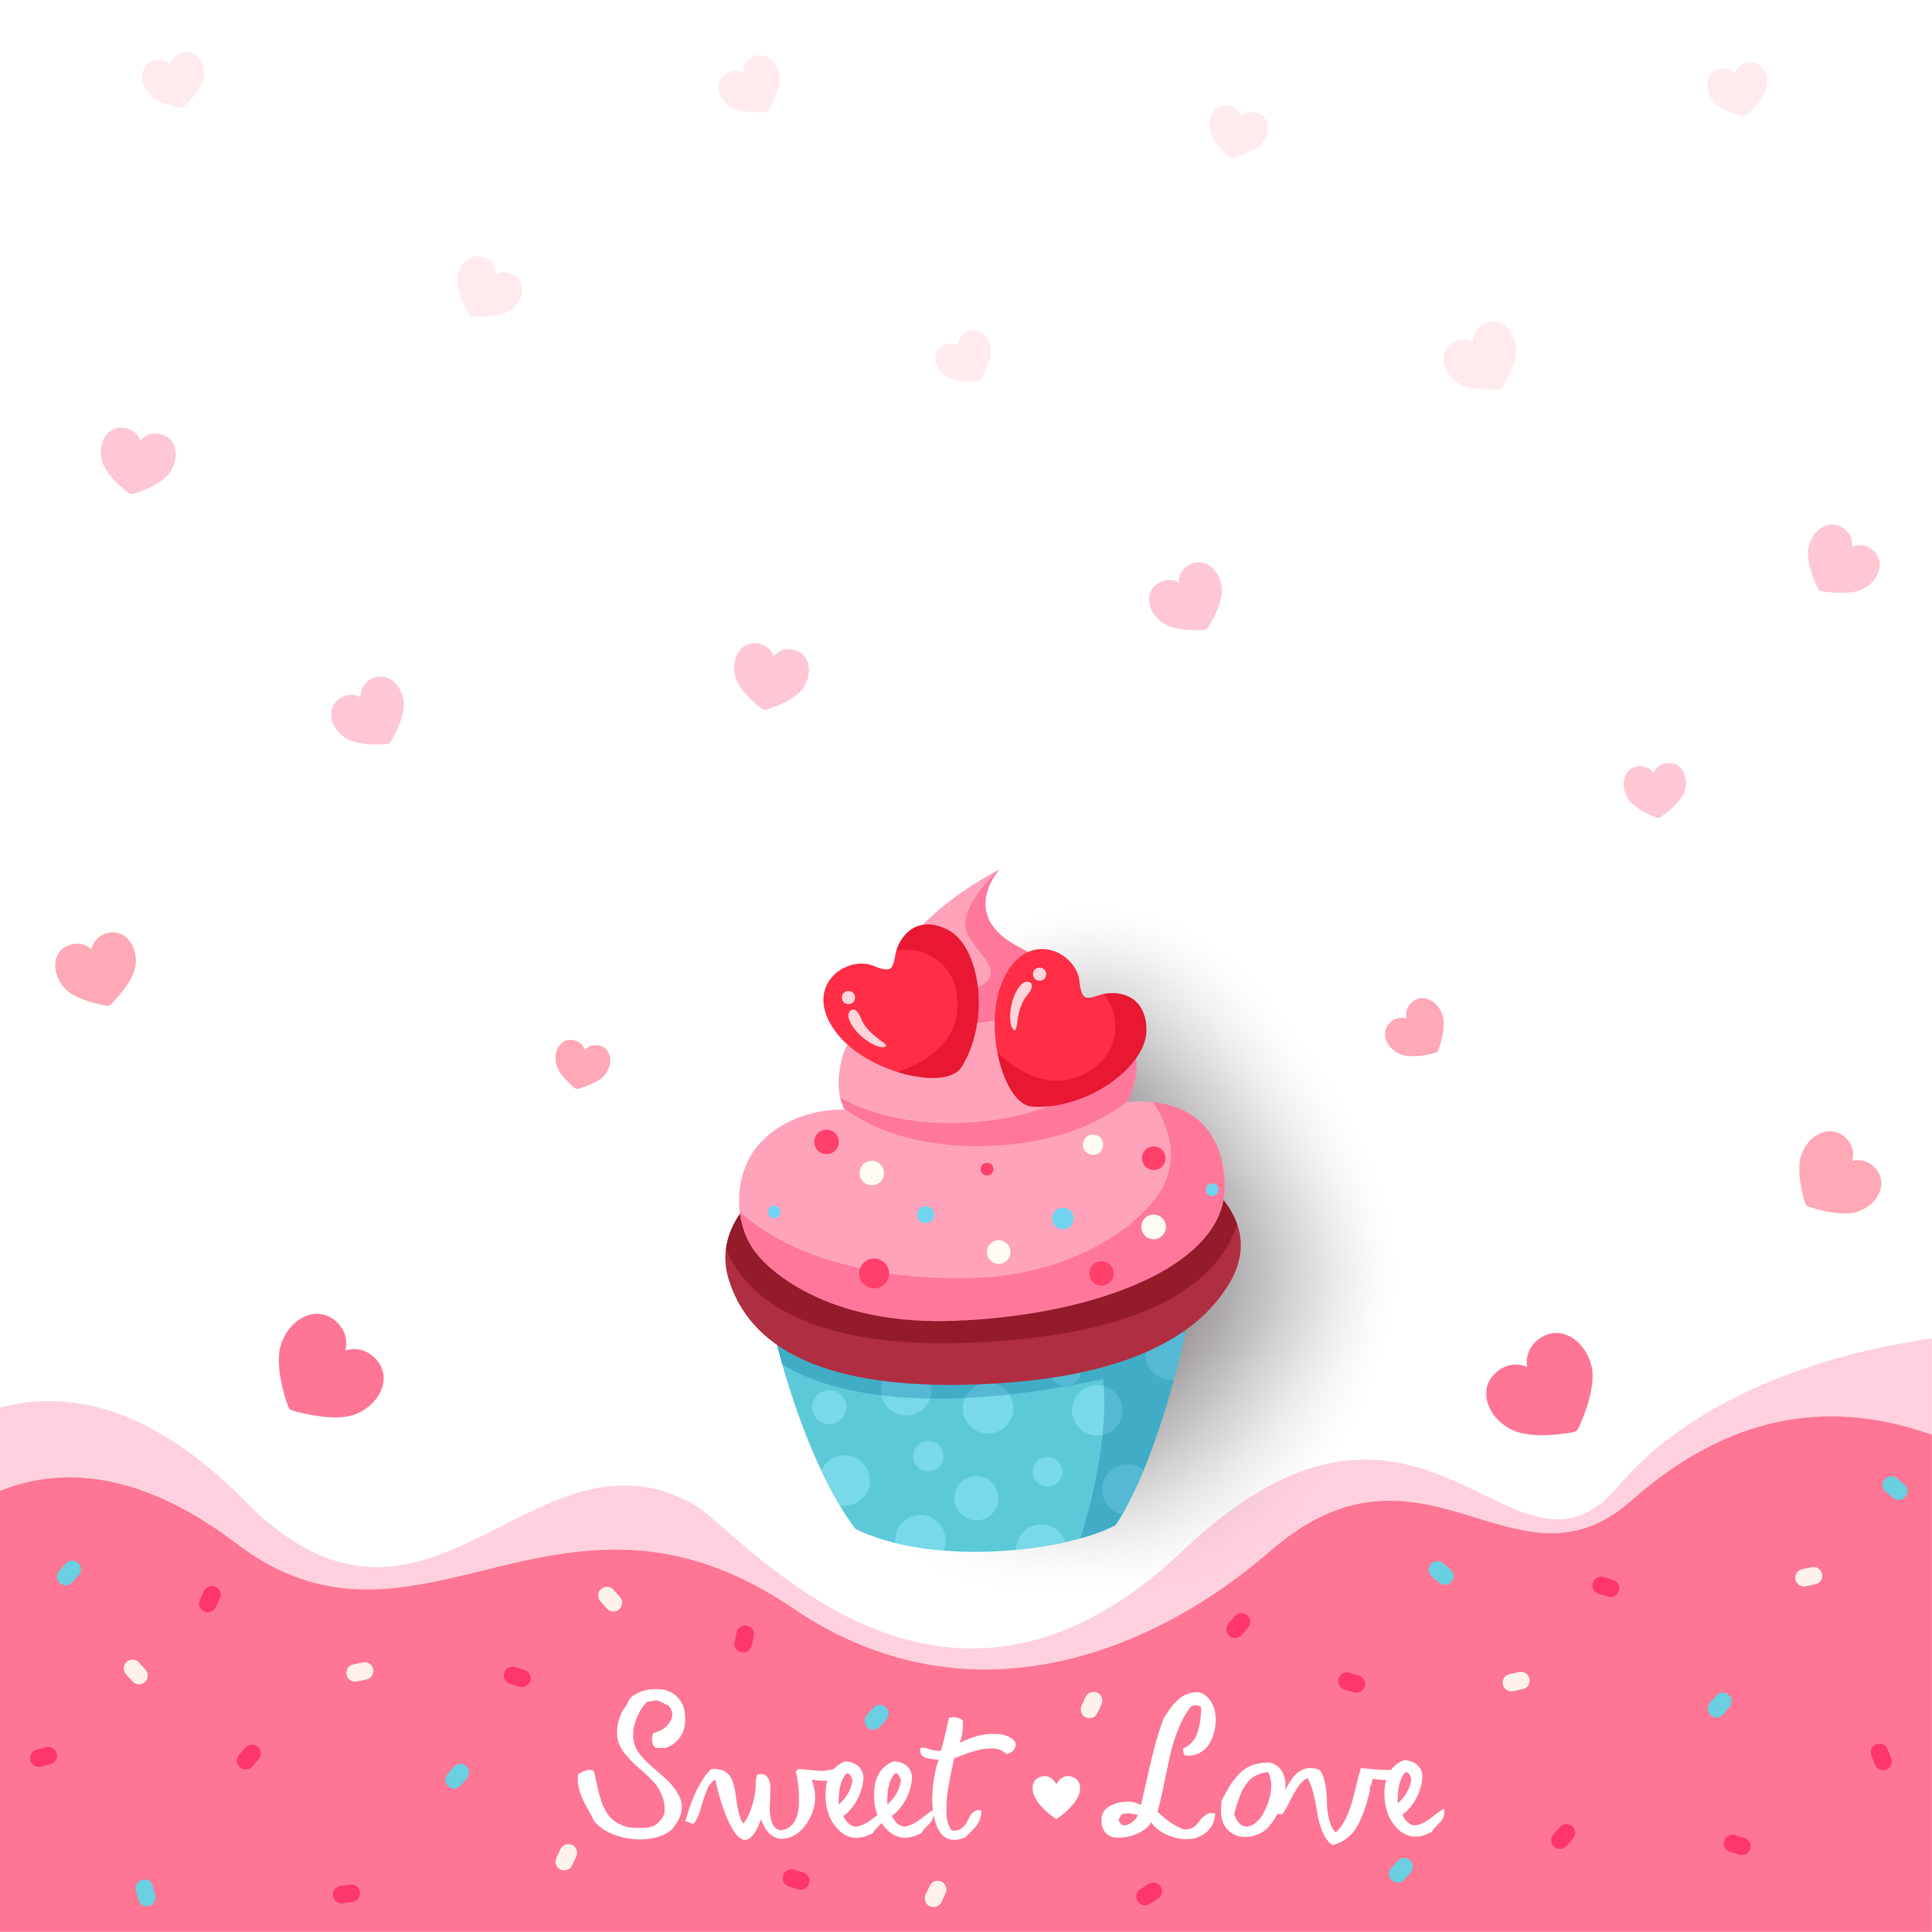 Illustration vector of love cupcake for Valentine&rsquo;s Day